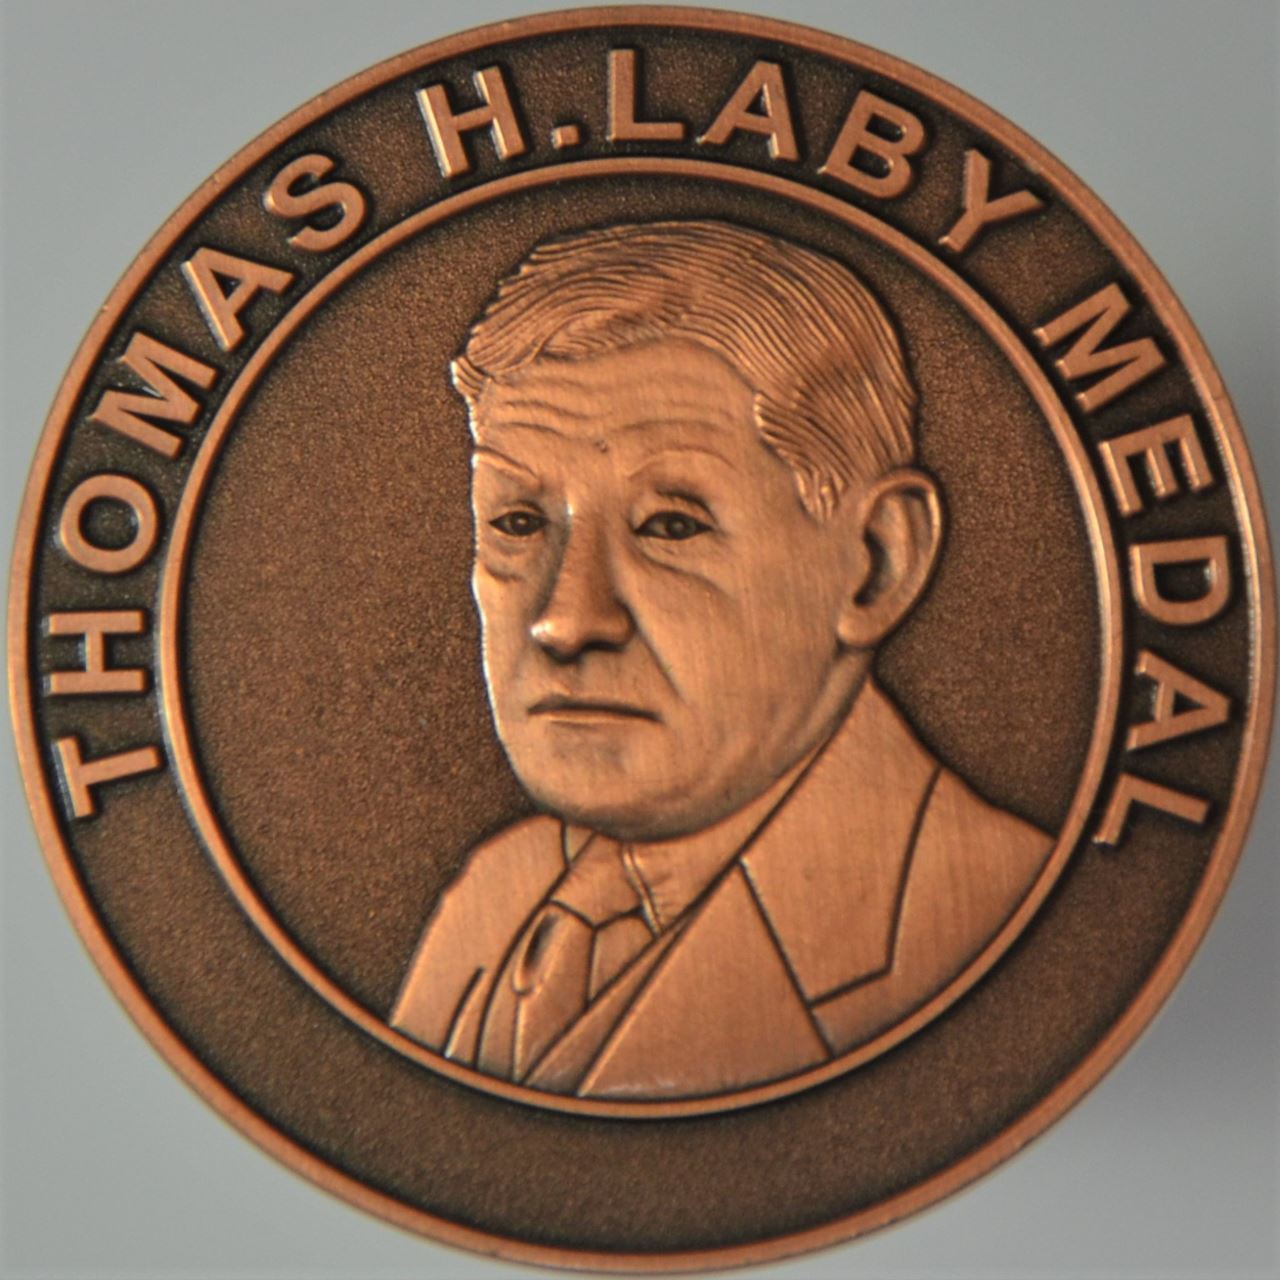 The TH Laby medal, which depicts Thomas H. Laby